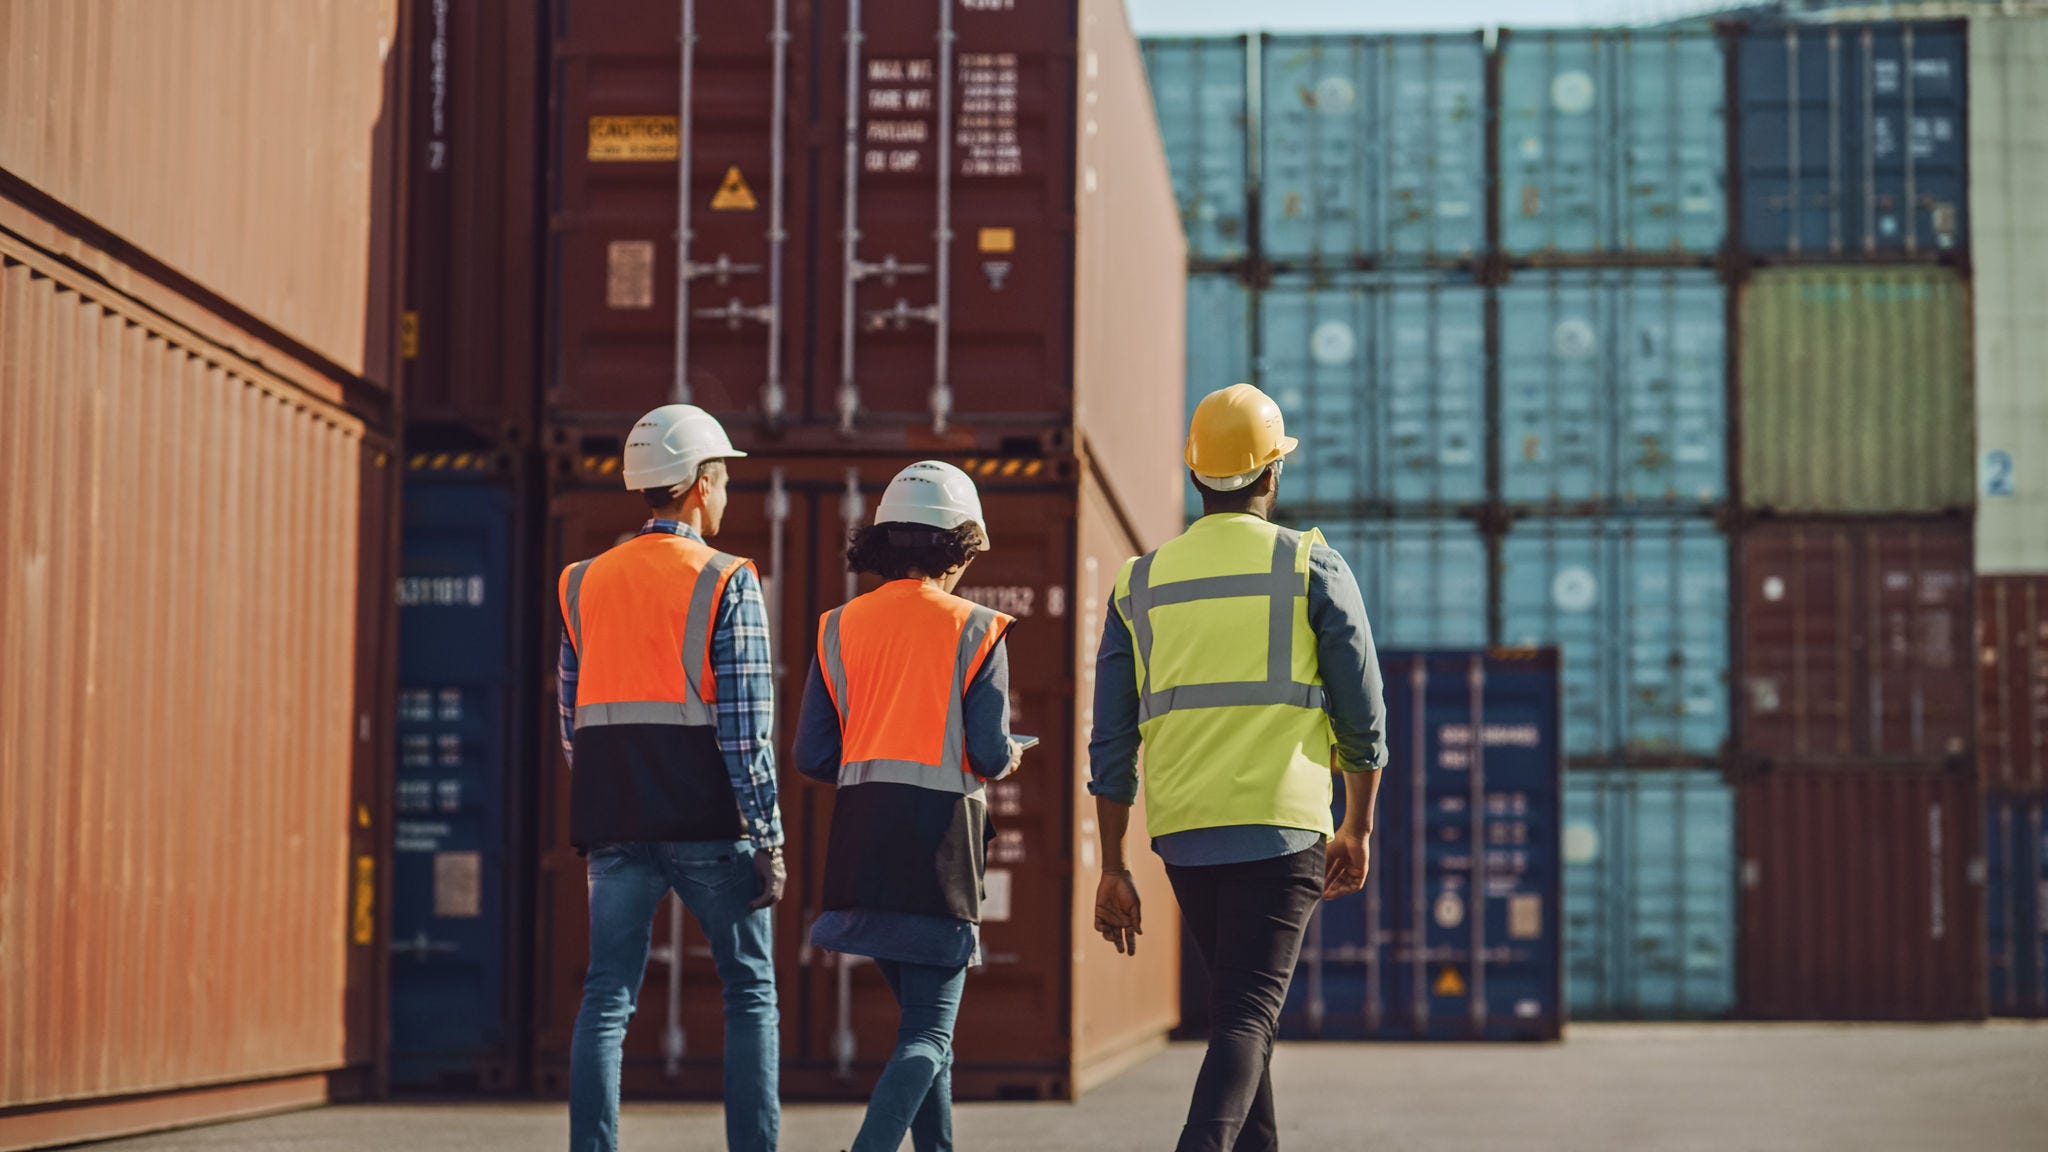 Team of Diverse Industrial Engineers, Safety Supervisors and Foremen in Hard Hats and Safety Vests Walking in Shipping Cargo Container Terminal Depot. Colleagues Talk About Logistics Operations.